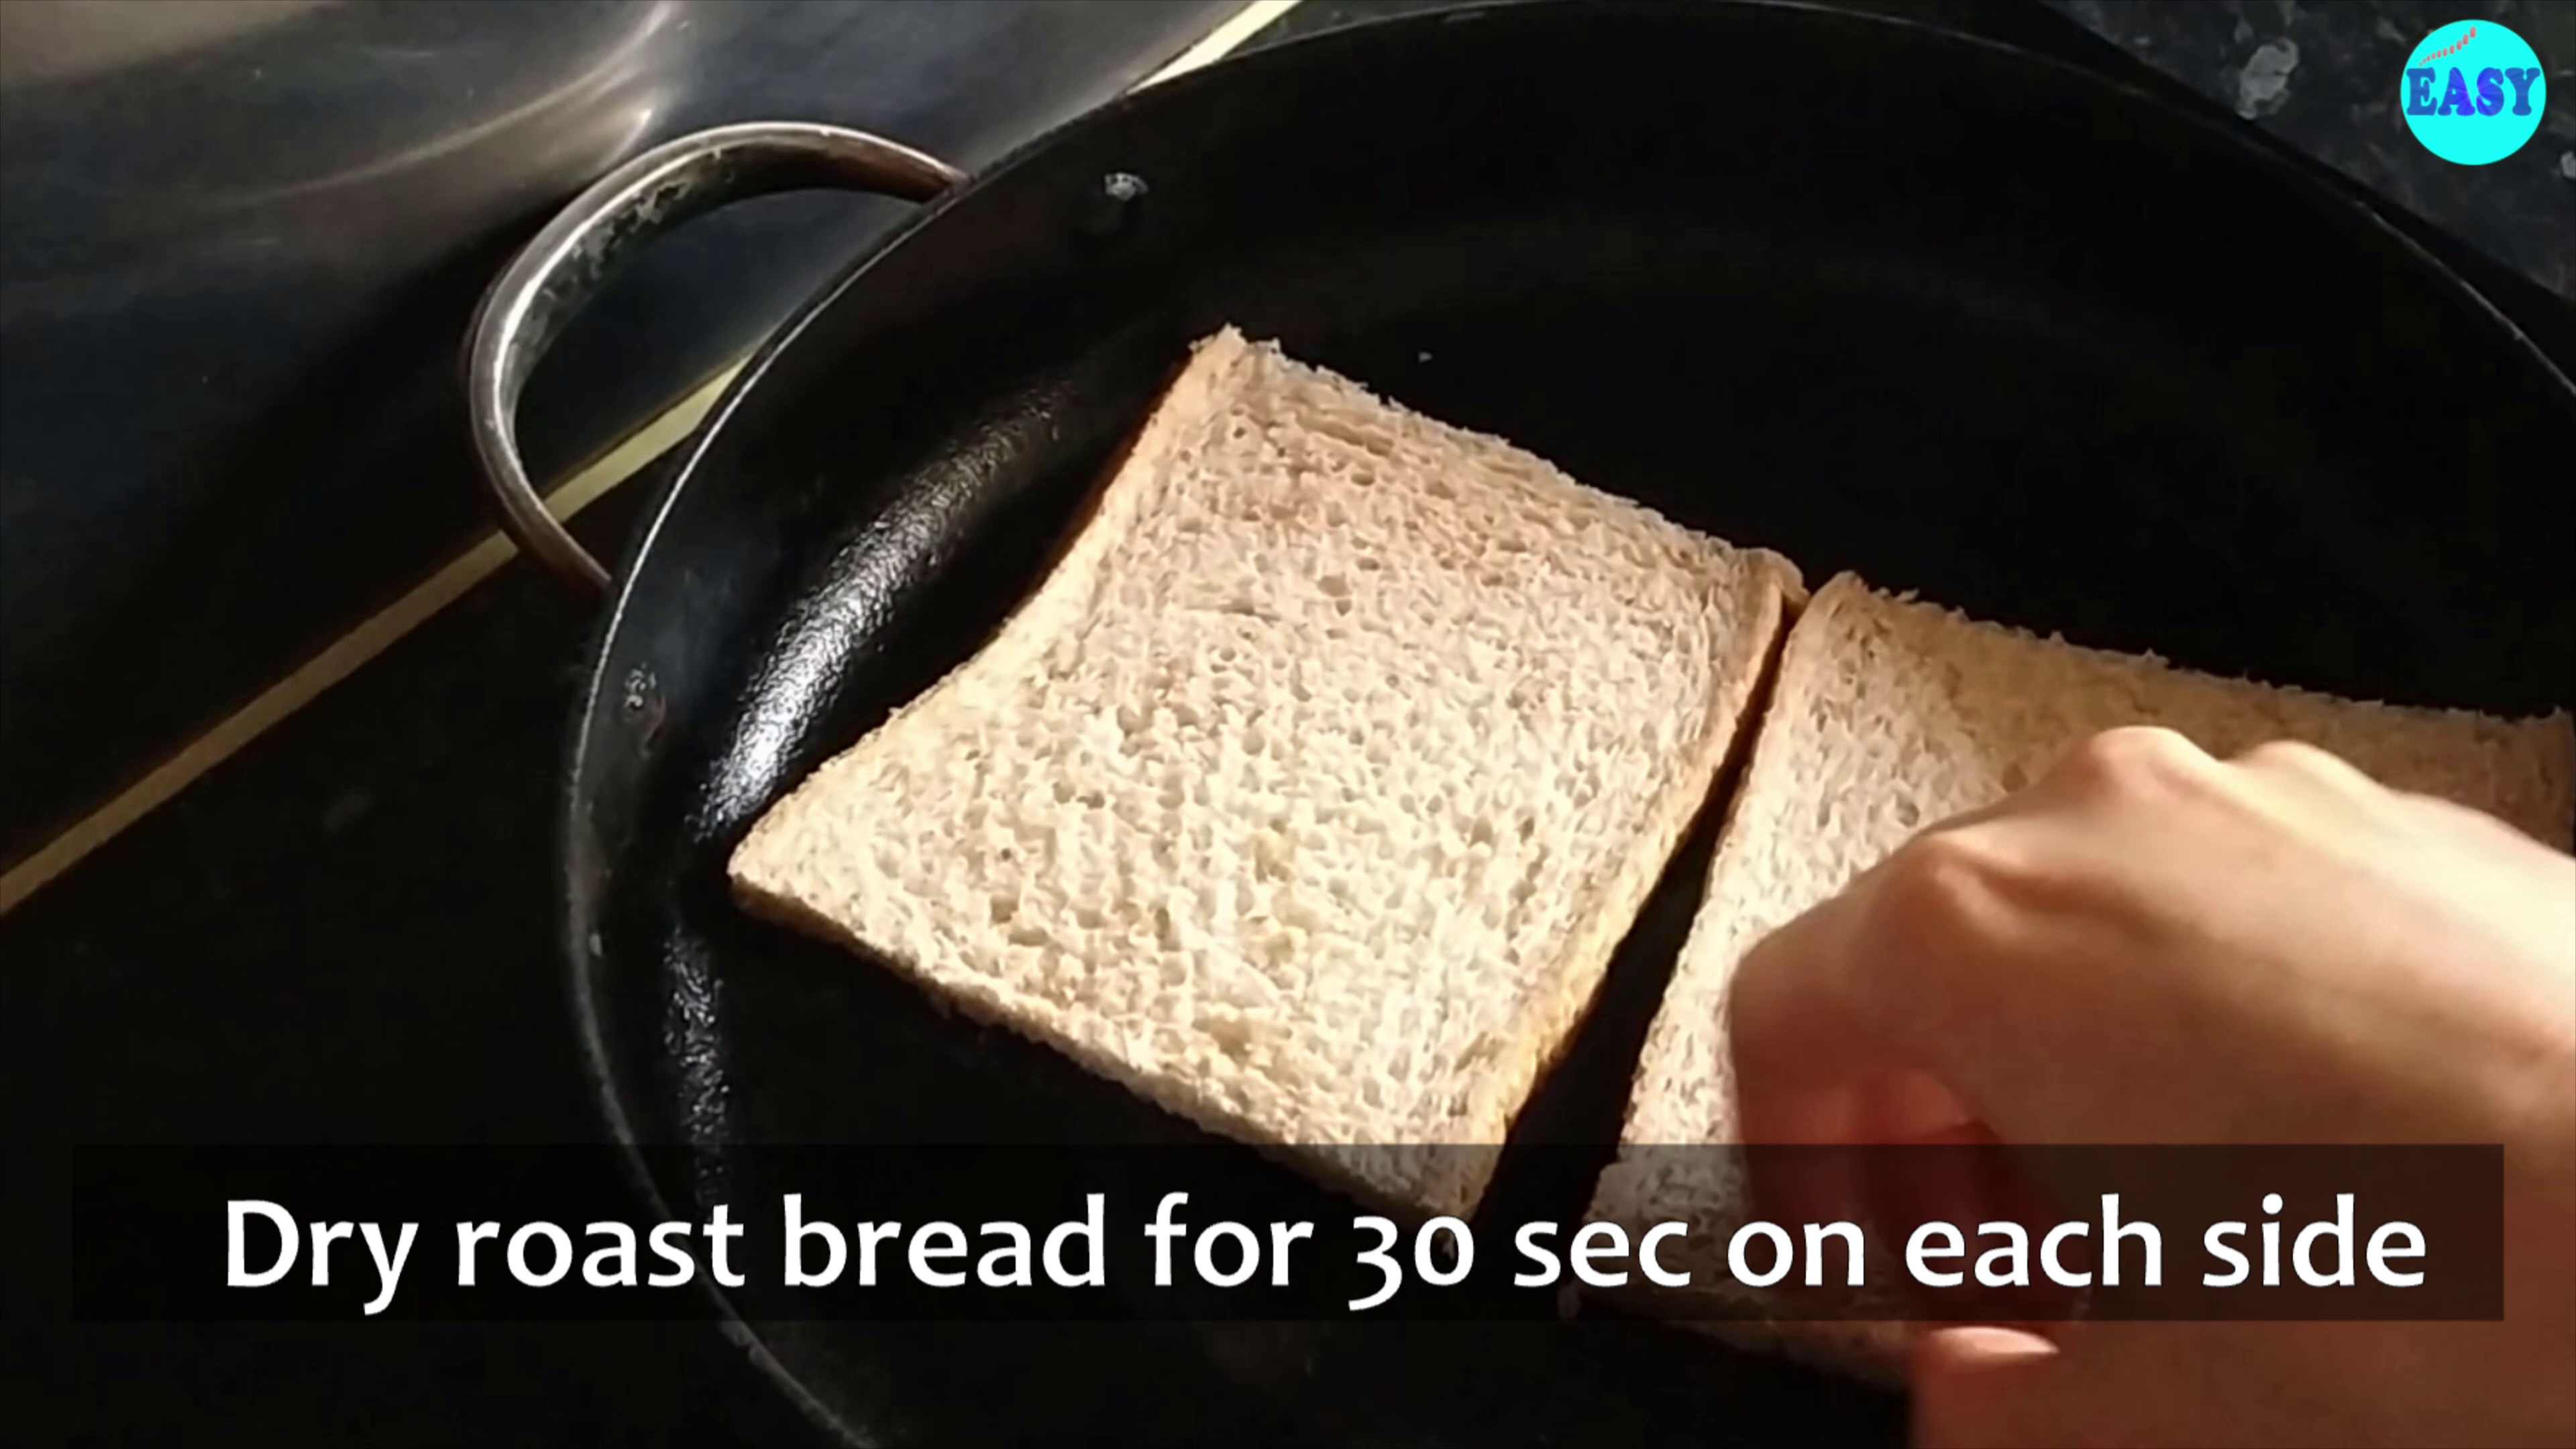 Step 1 - Heat a pan or tawa and lightly dry roast bread slice for 30 seconds on each side at low to medium flame.